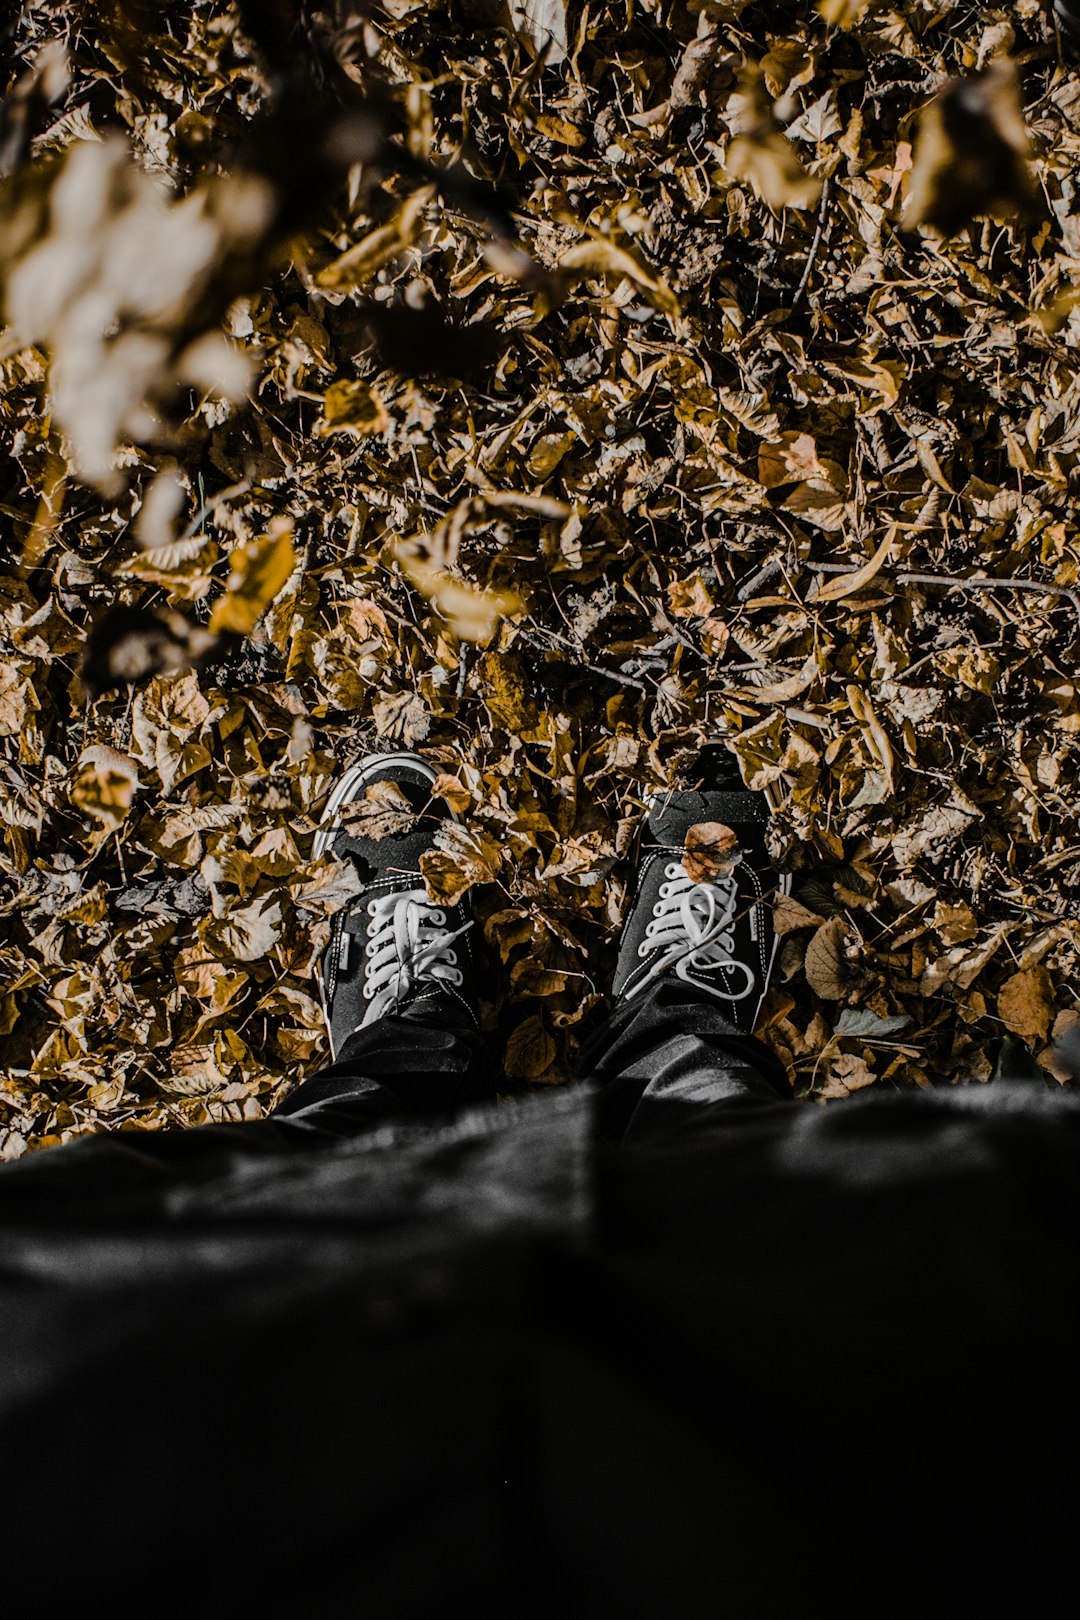 person in black pants and black and white sneakers sitting on brown dried leaves